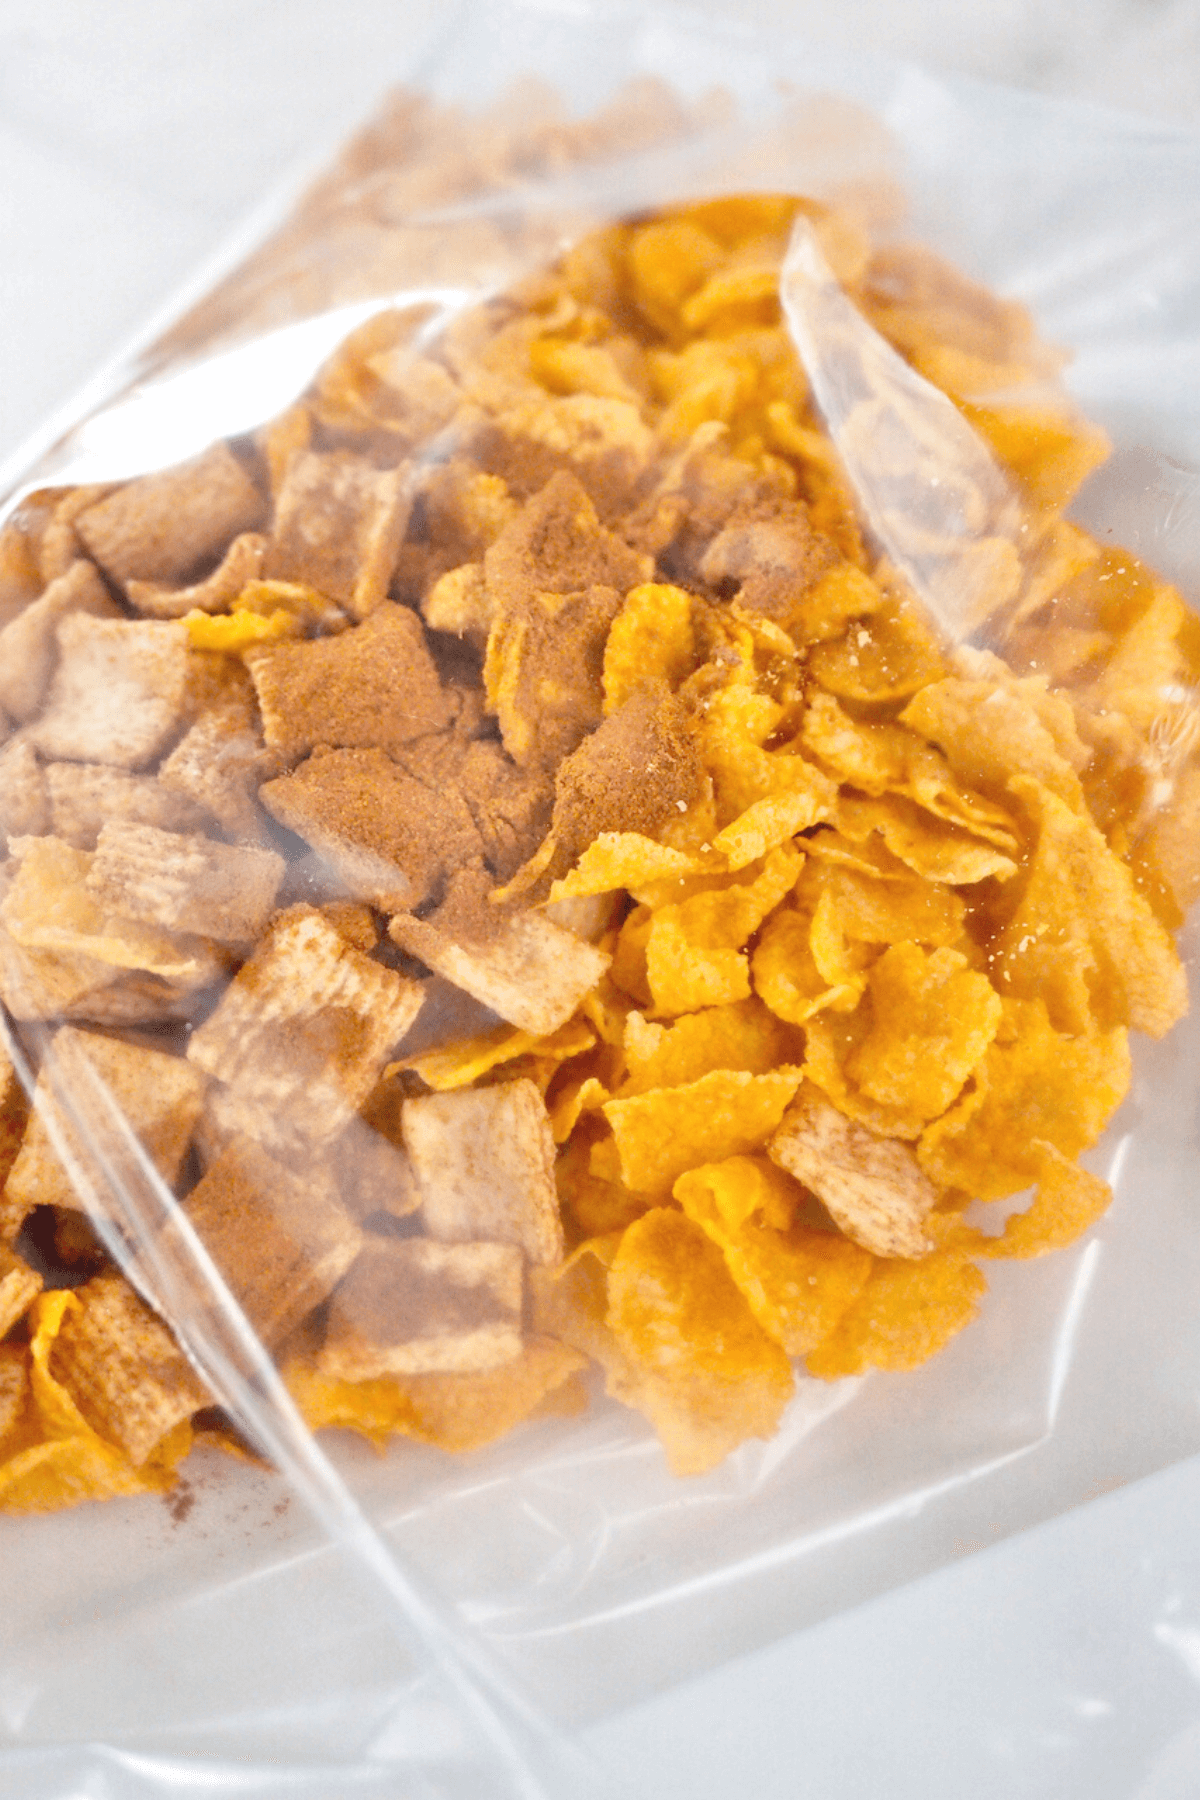 Cereal and cinnamon added to baggie for crushing. 